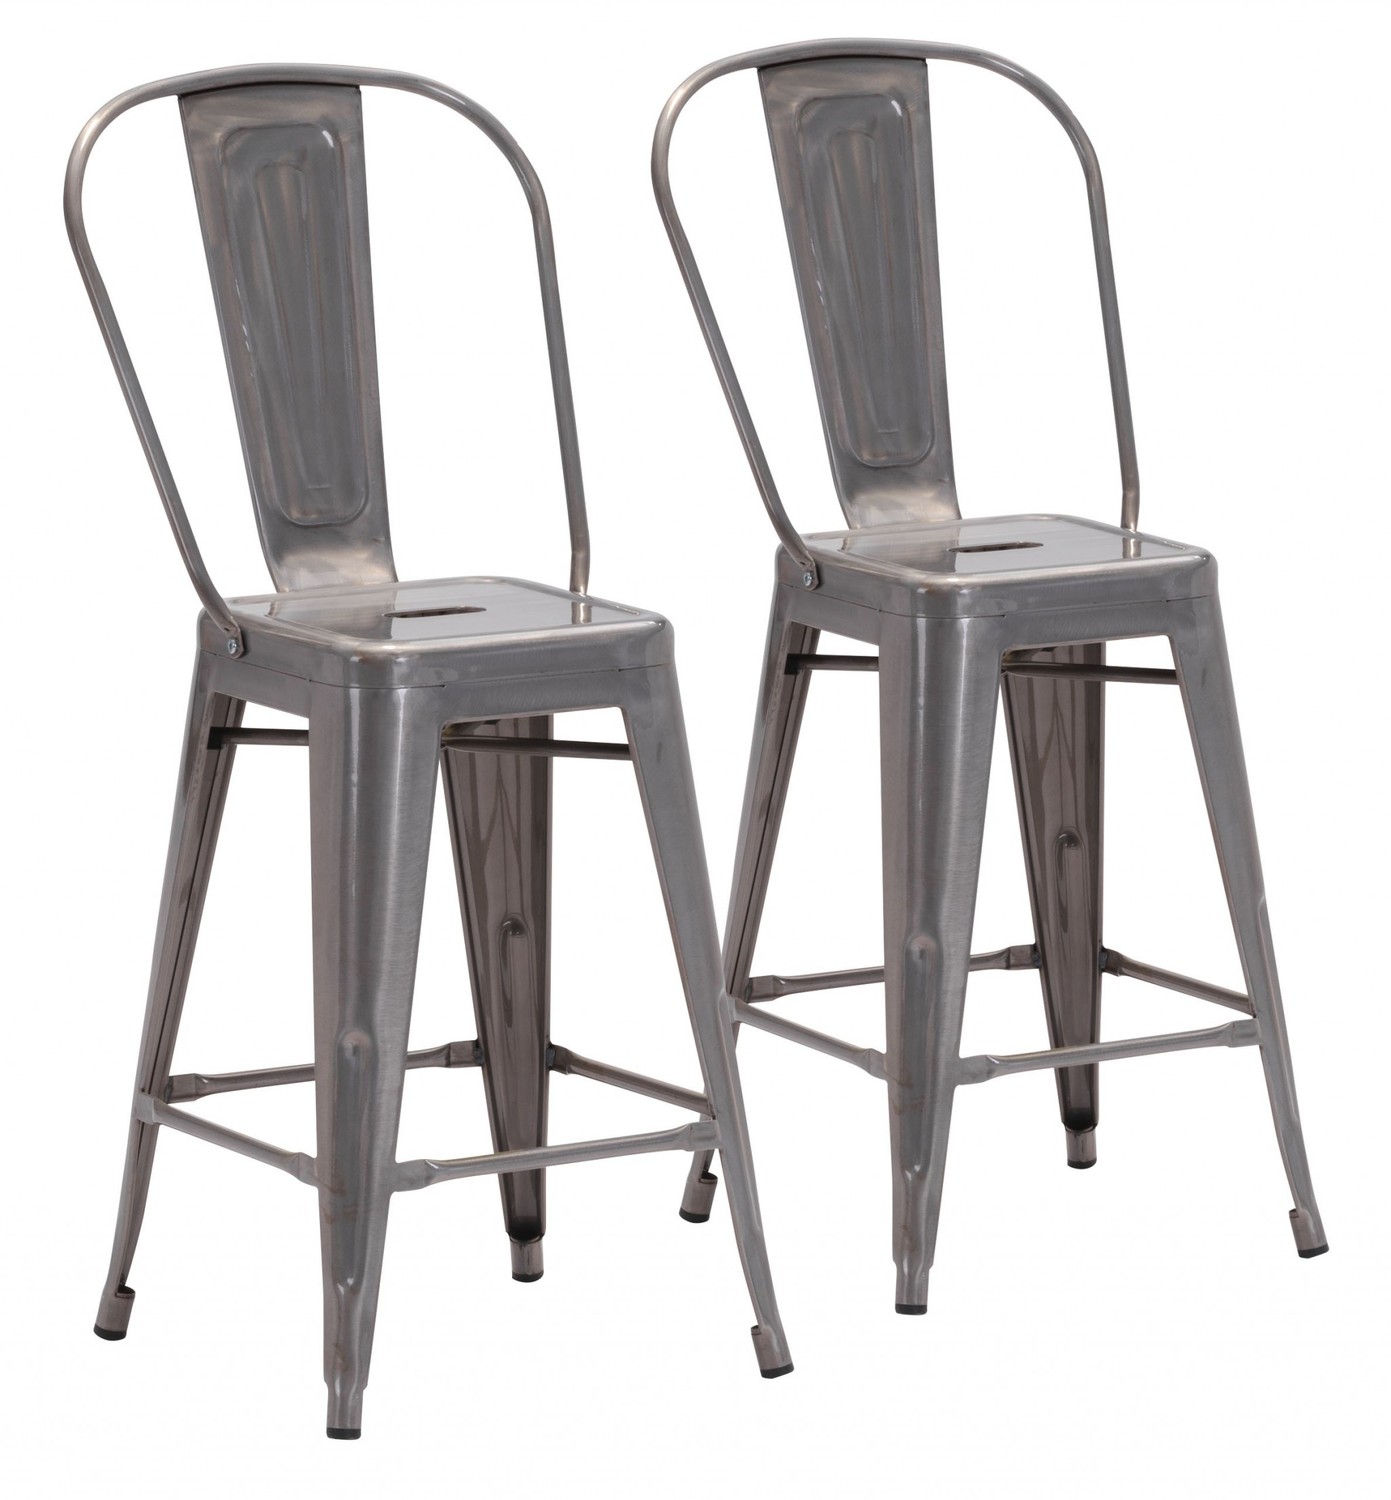 Set of Two Gray Steel Counter Chairs